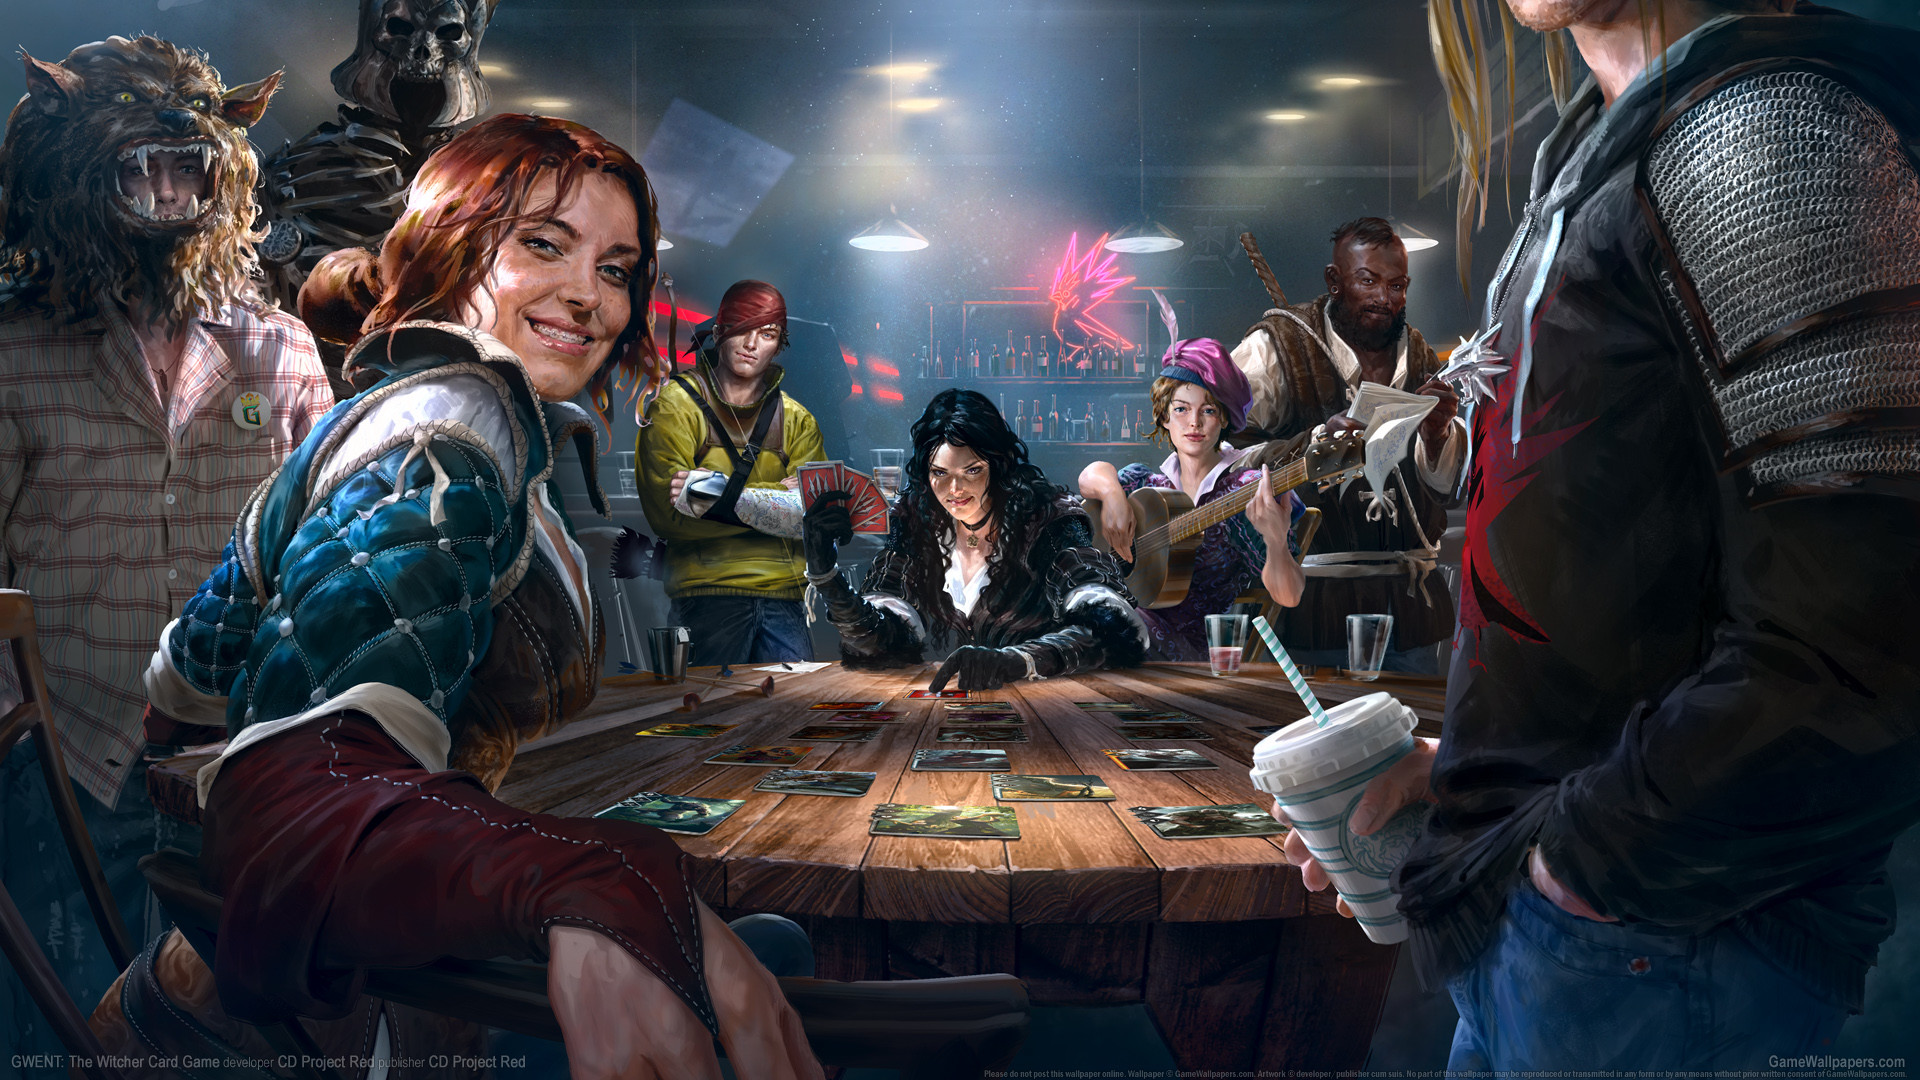 1920x1080 ... The Witcher Card Game wallpaper 01  ...